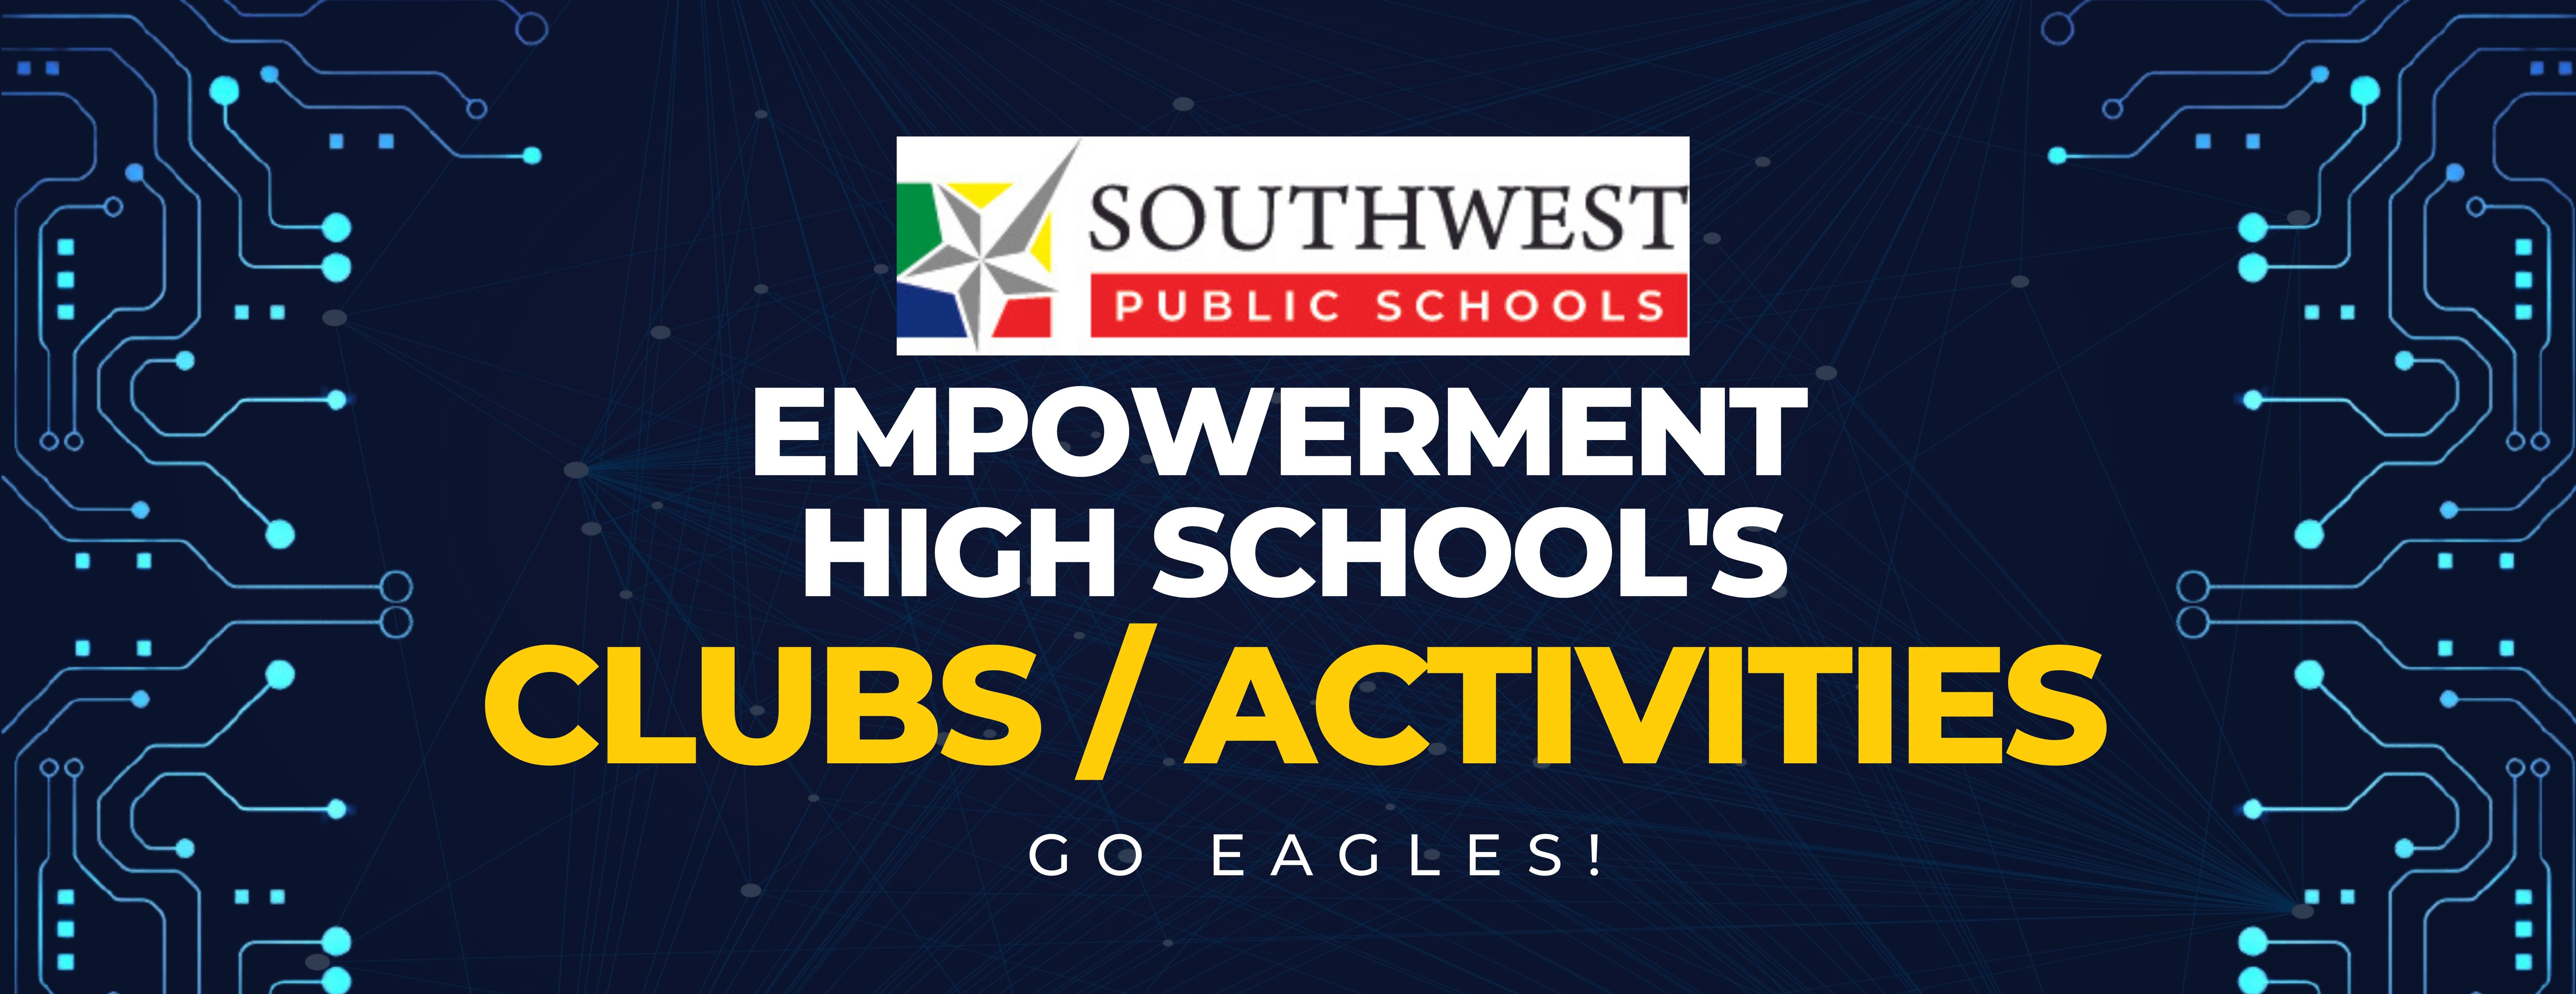 Empowerment High School's Clubs/Activities Page